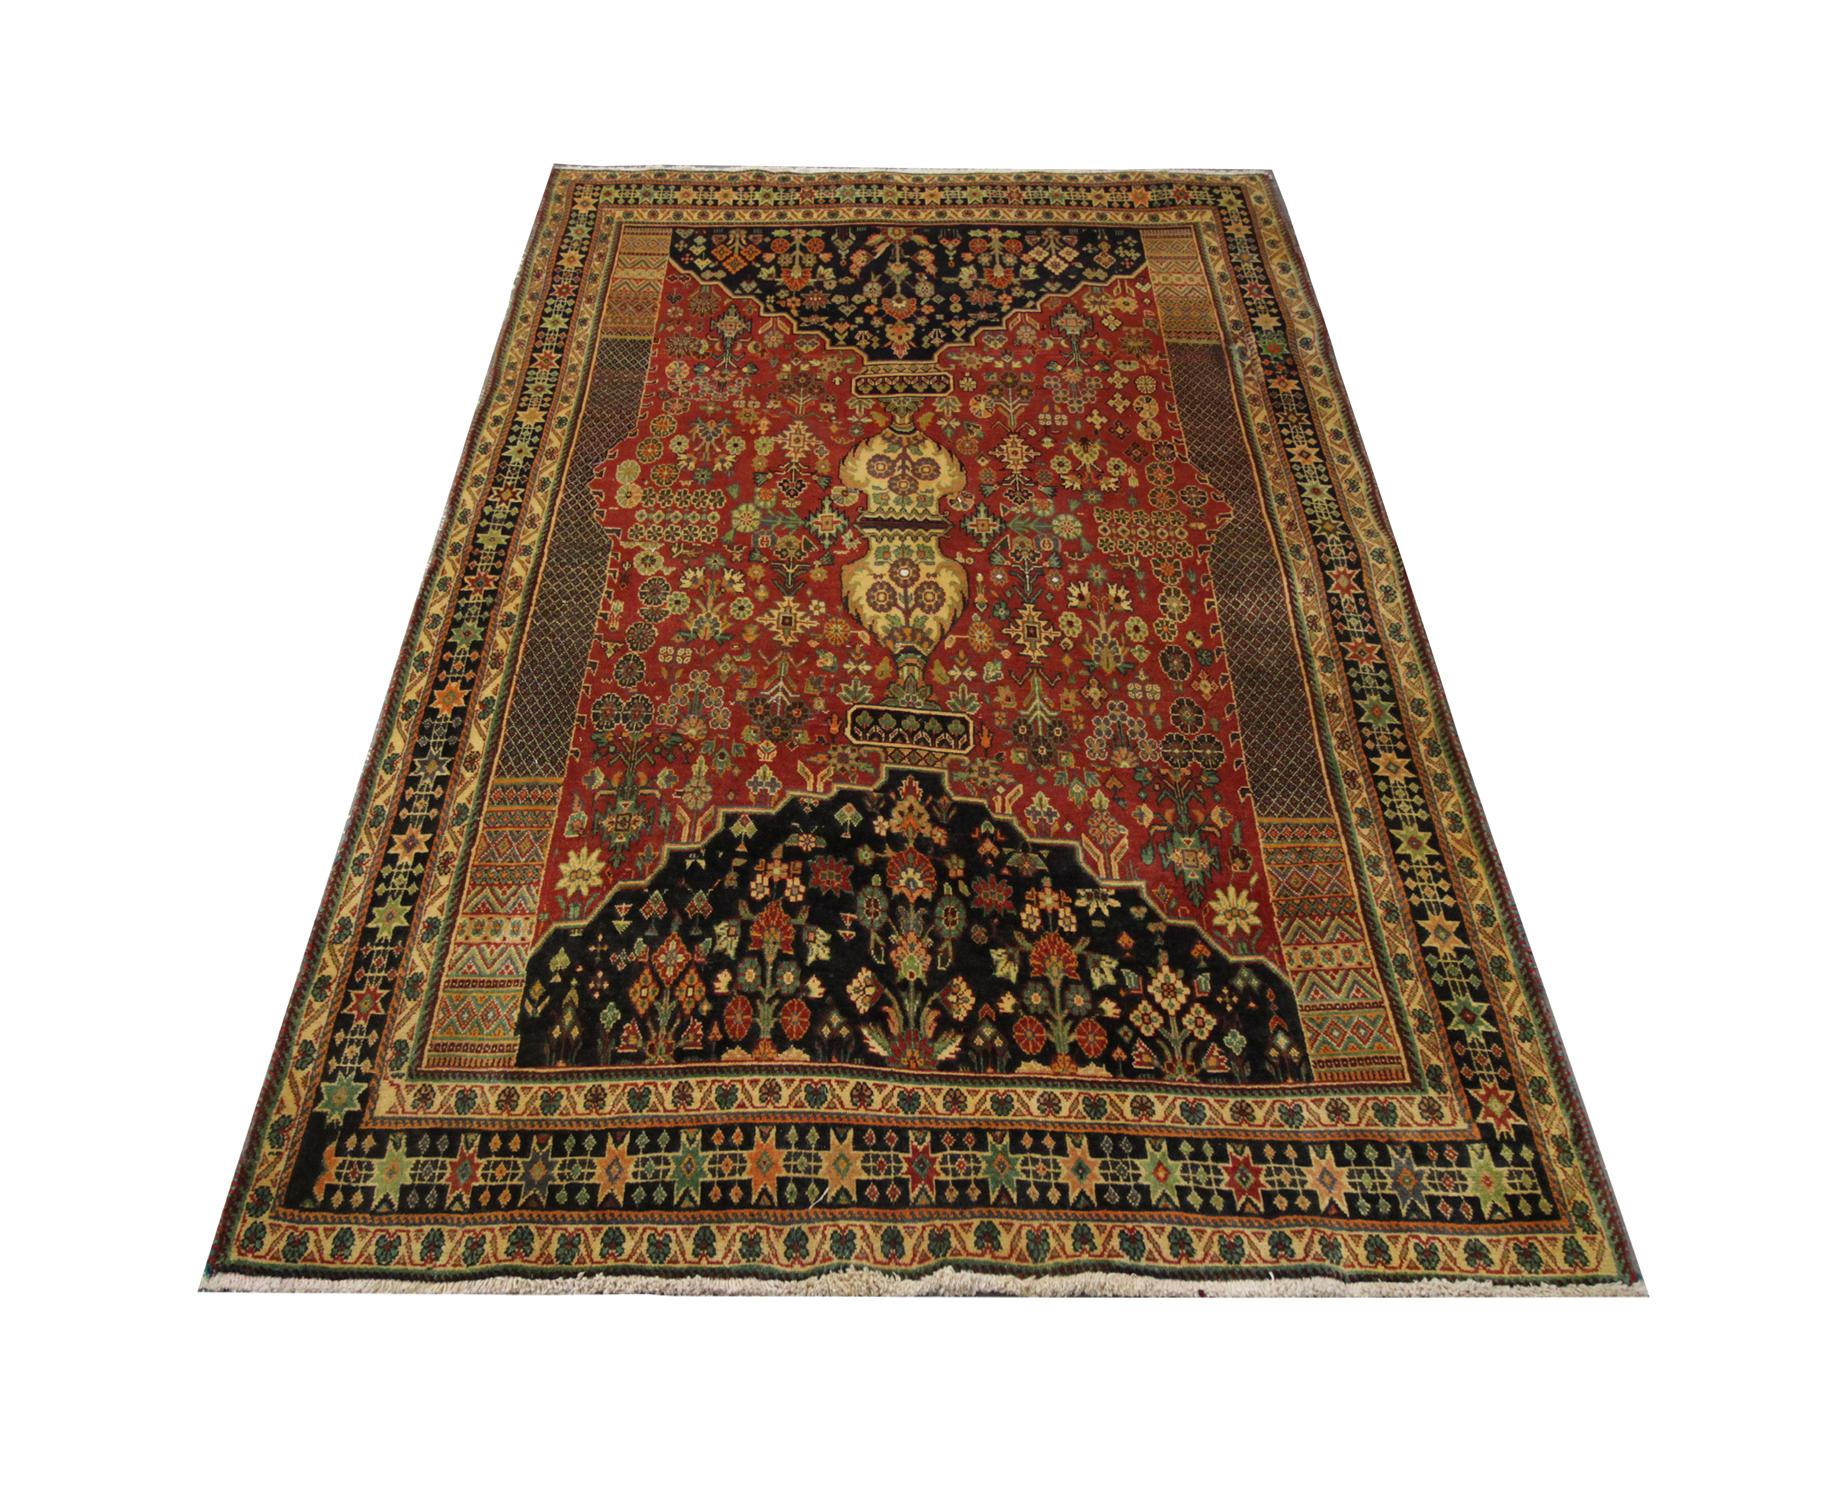 Featuring intricately woven motifs and emblems on a mixture of red and deep brown backgrounds through the centre. This is then enclosed by a highly-detailed layered border.
This high quality Afghan tribal rug is perfect for both modern and